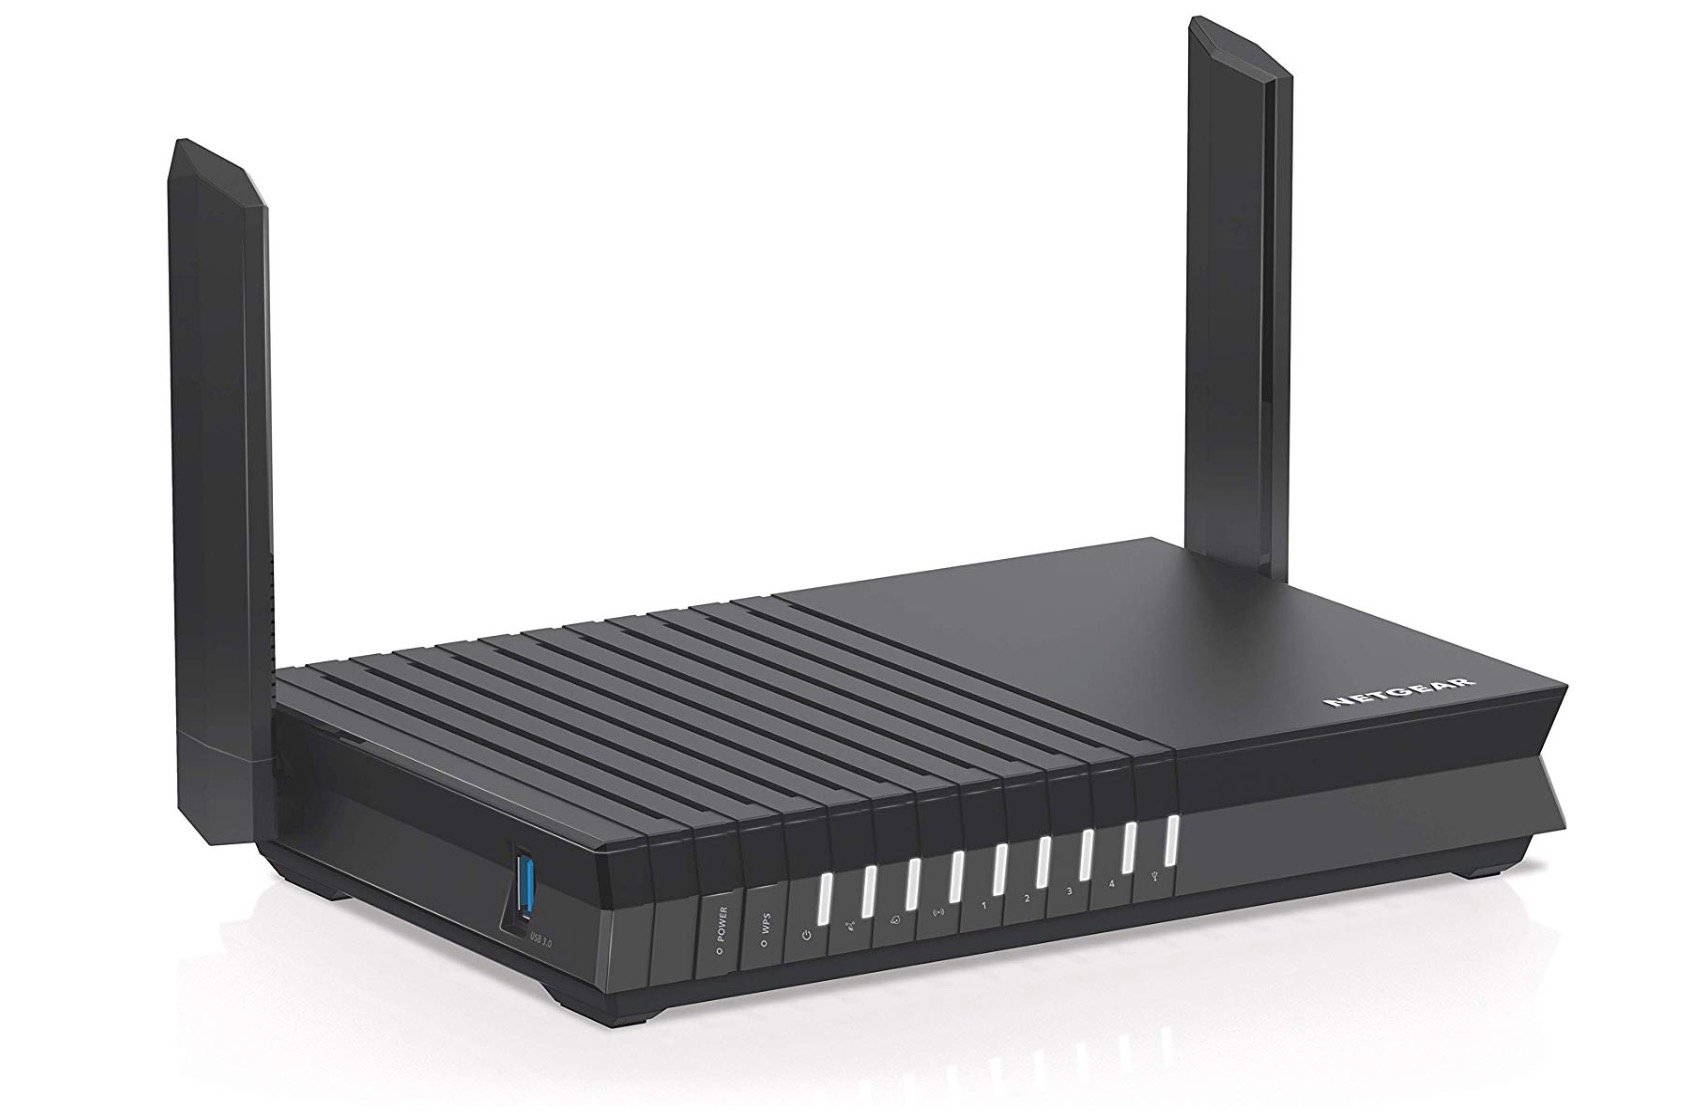 best router 2020